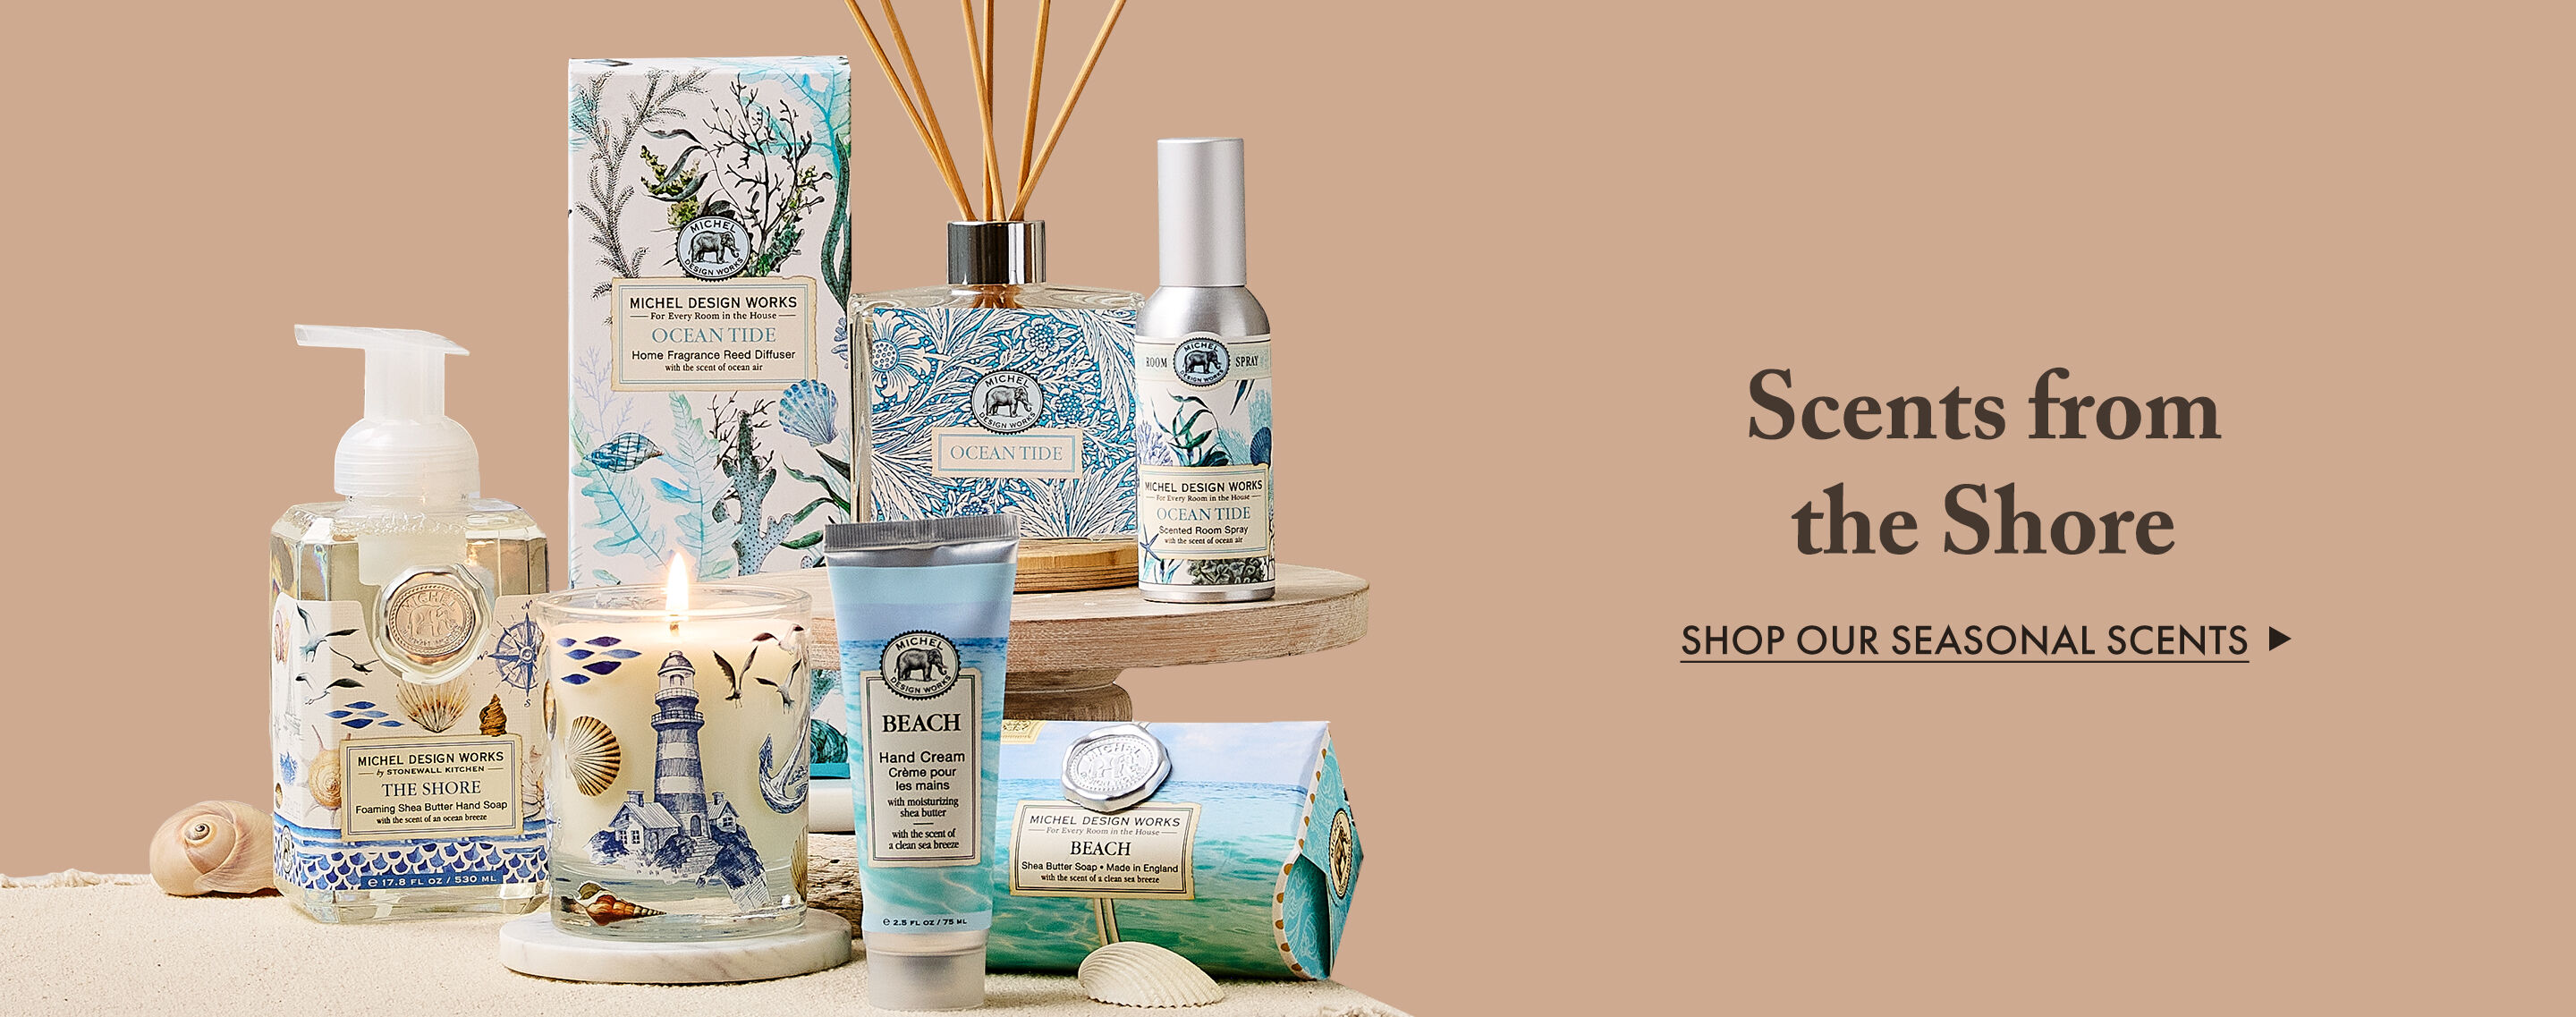 Scents from the Shore - Shop Our Seasonal Scents